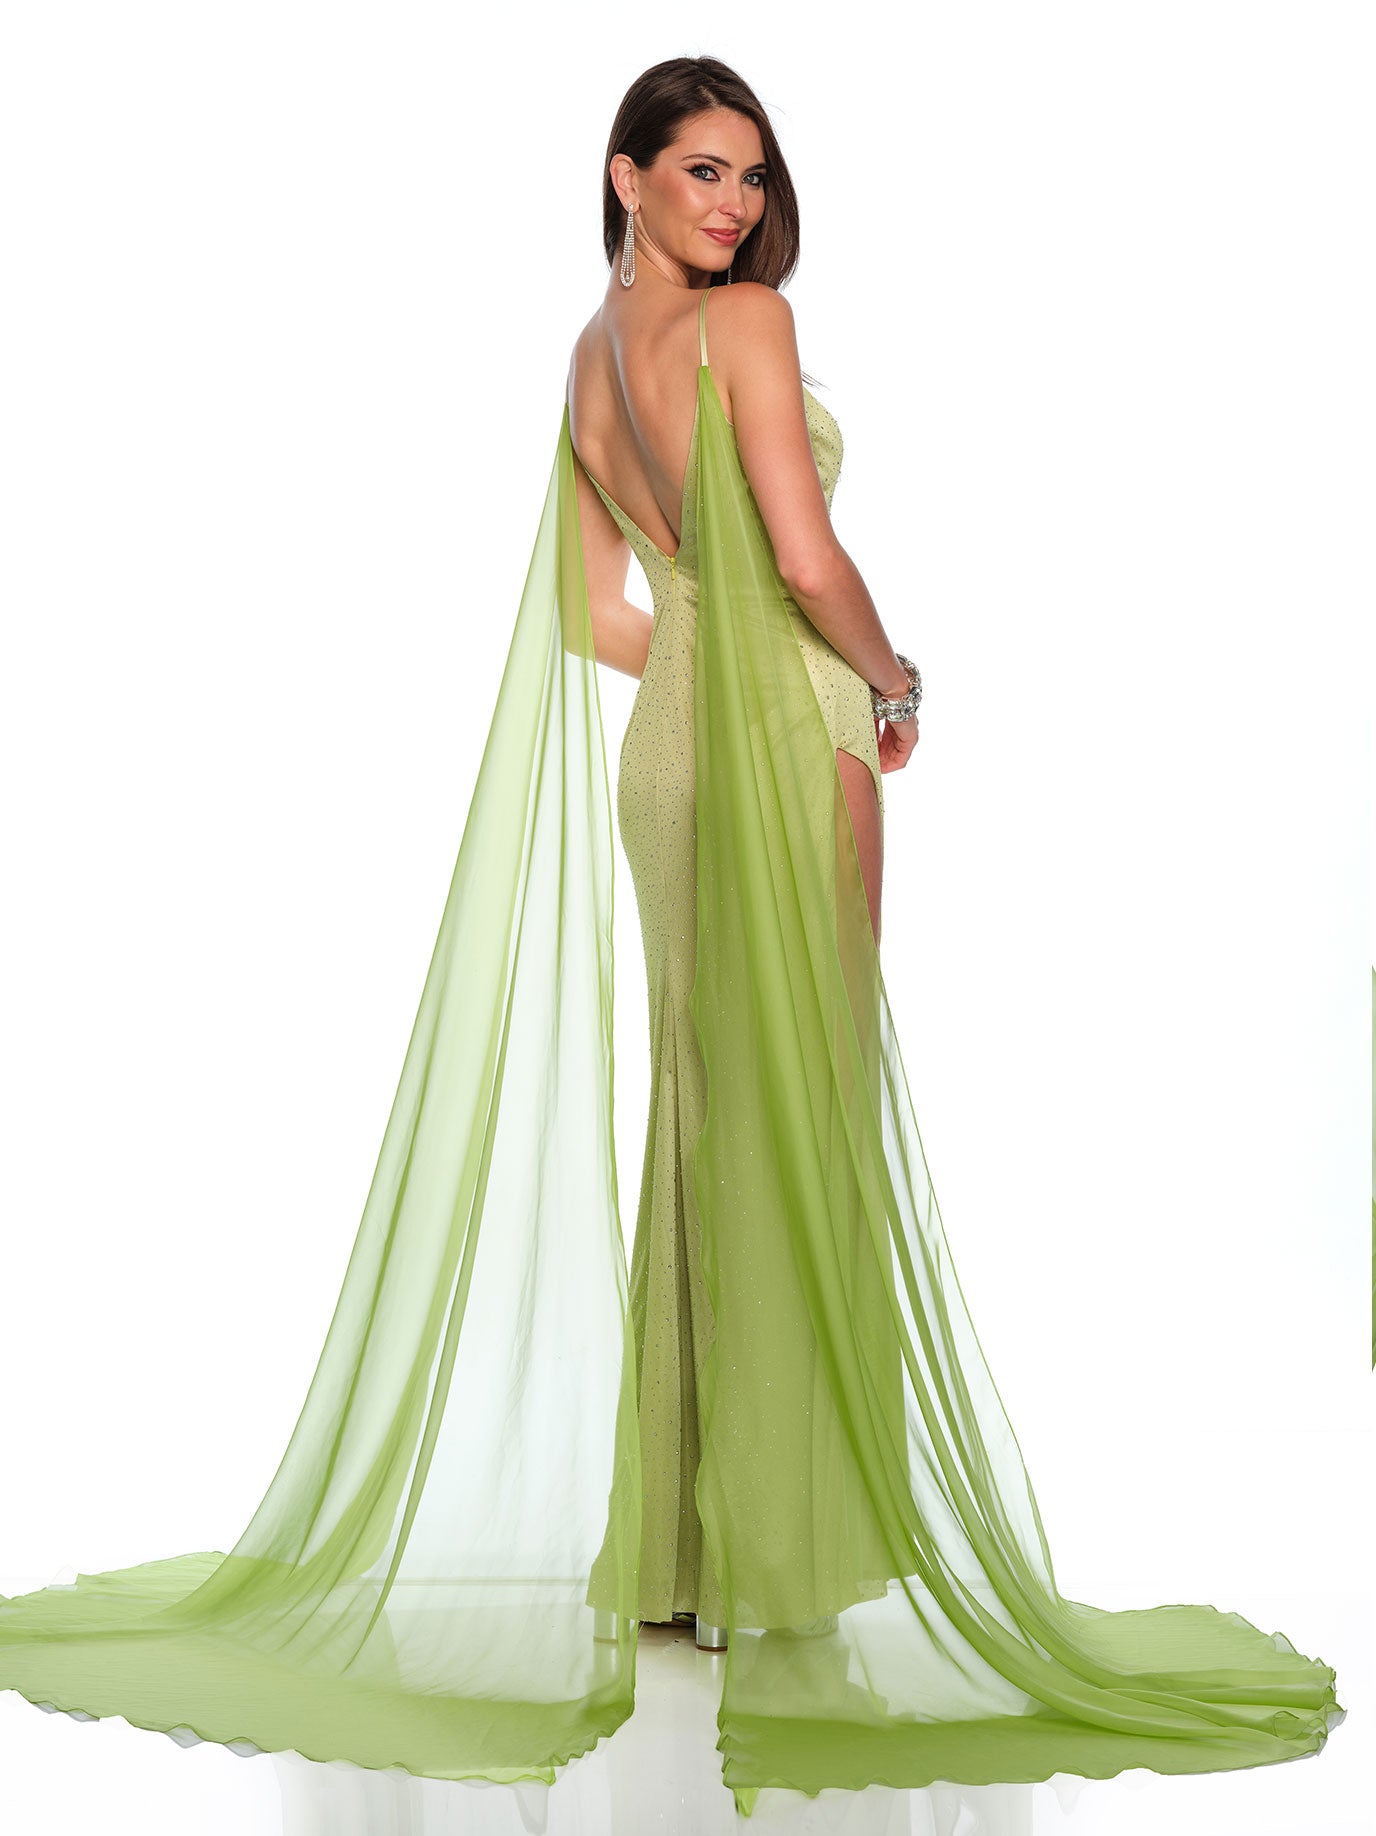 FITTED JERSEY GOWN WITH SCATTERED RHINESTONE ACCENTS